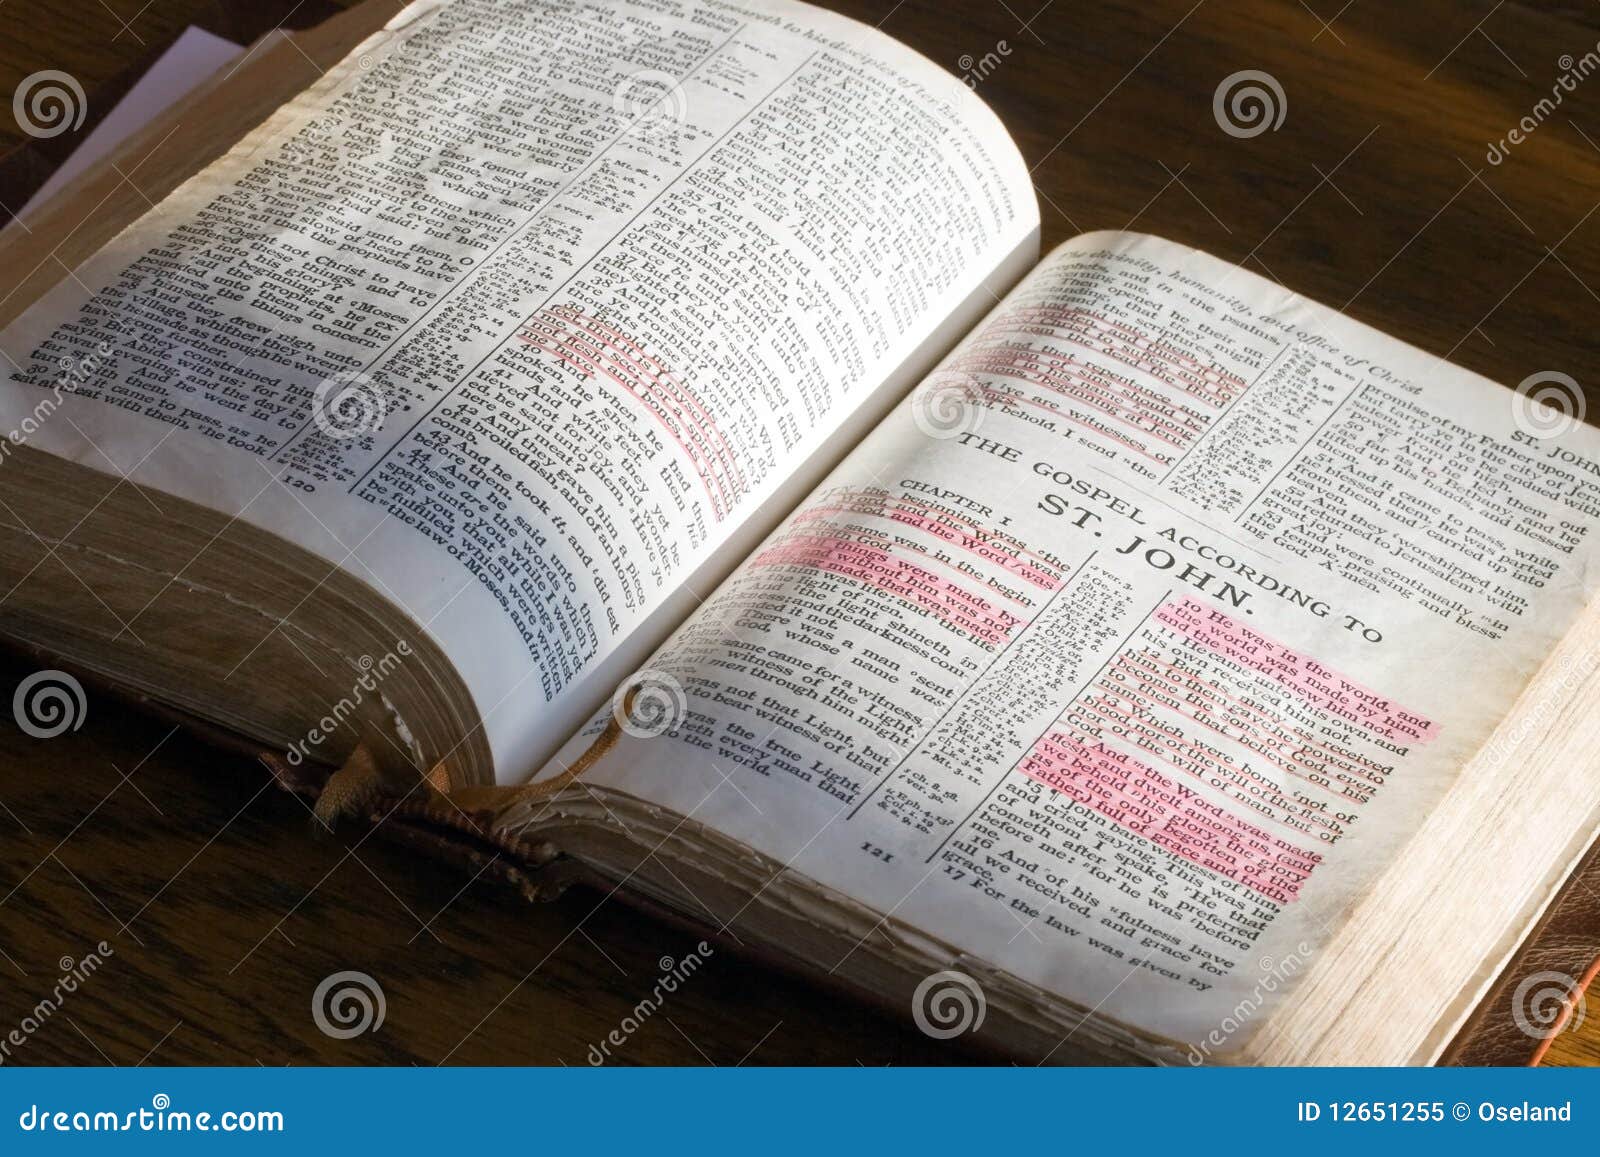 Holy Bible stock image. Image of religion, study, version - 12651255